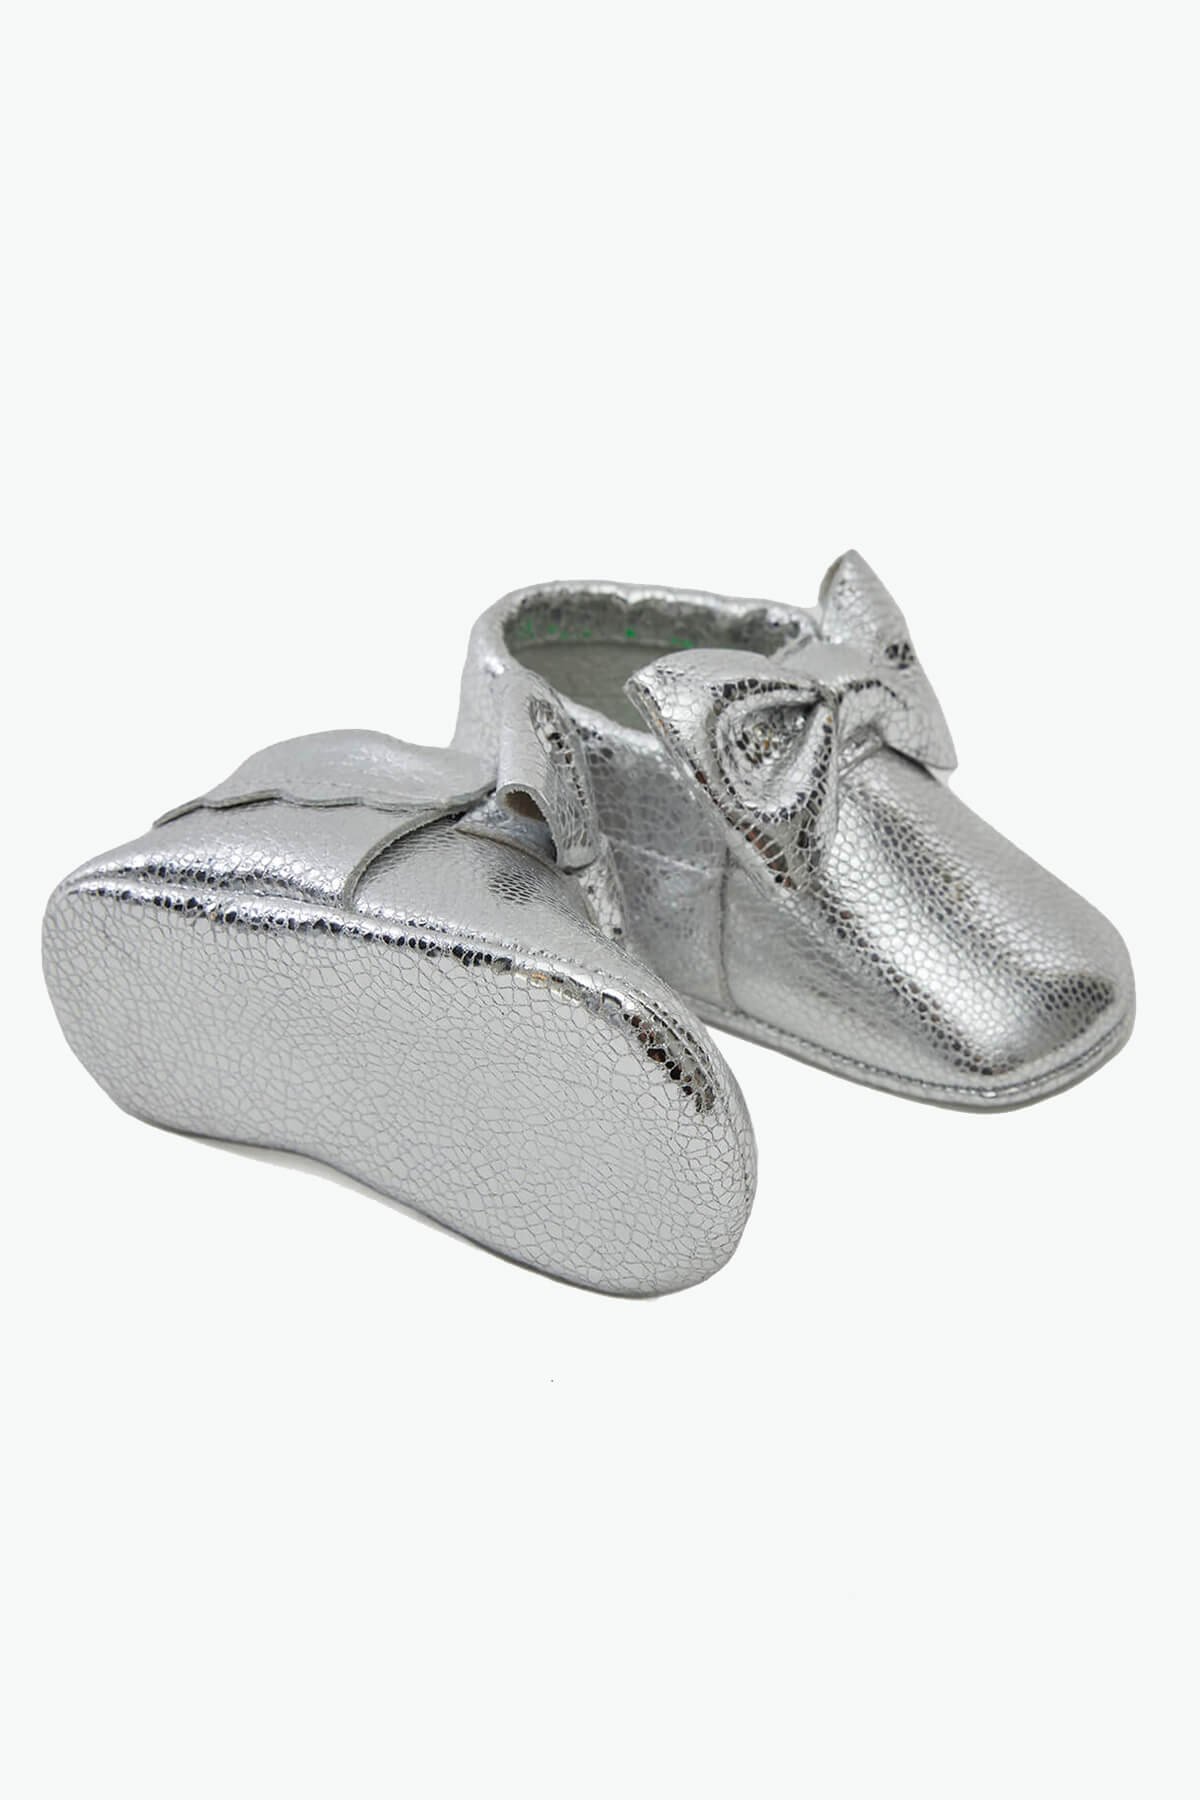 Genuine Leather Elastic Baby Shoes Silver Gray